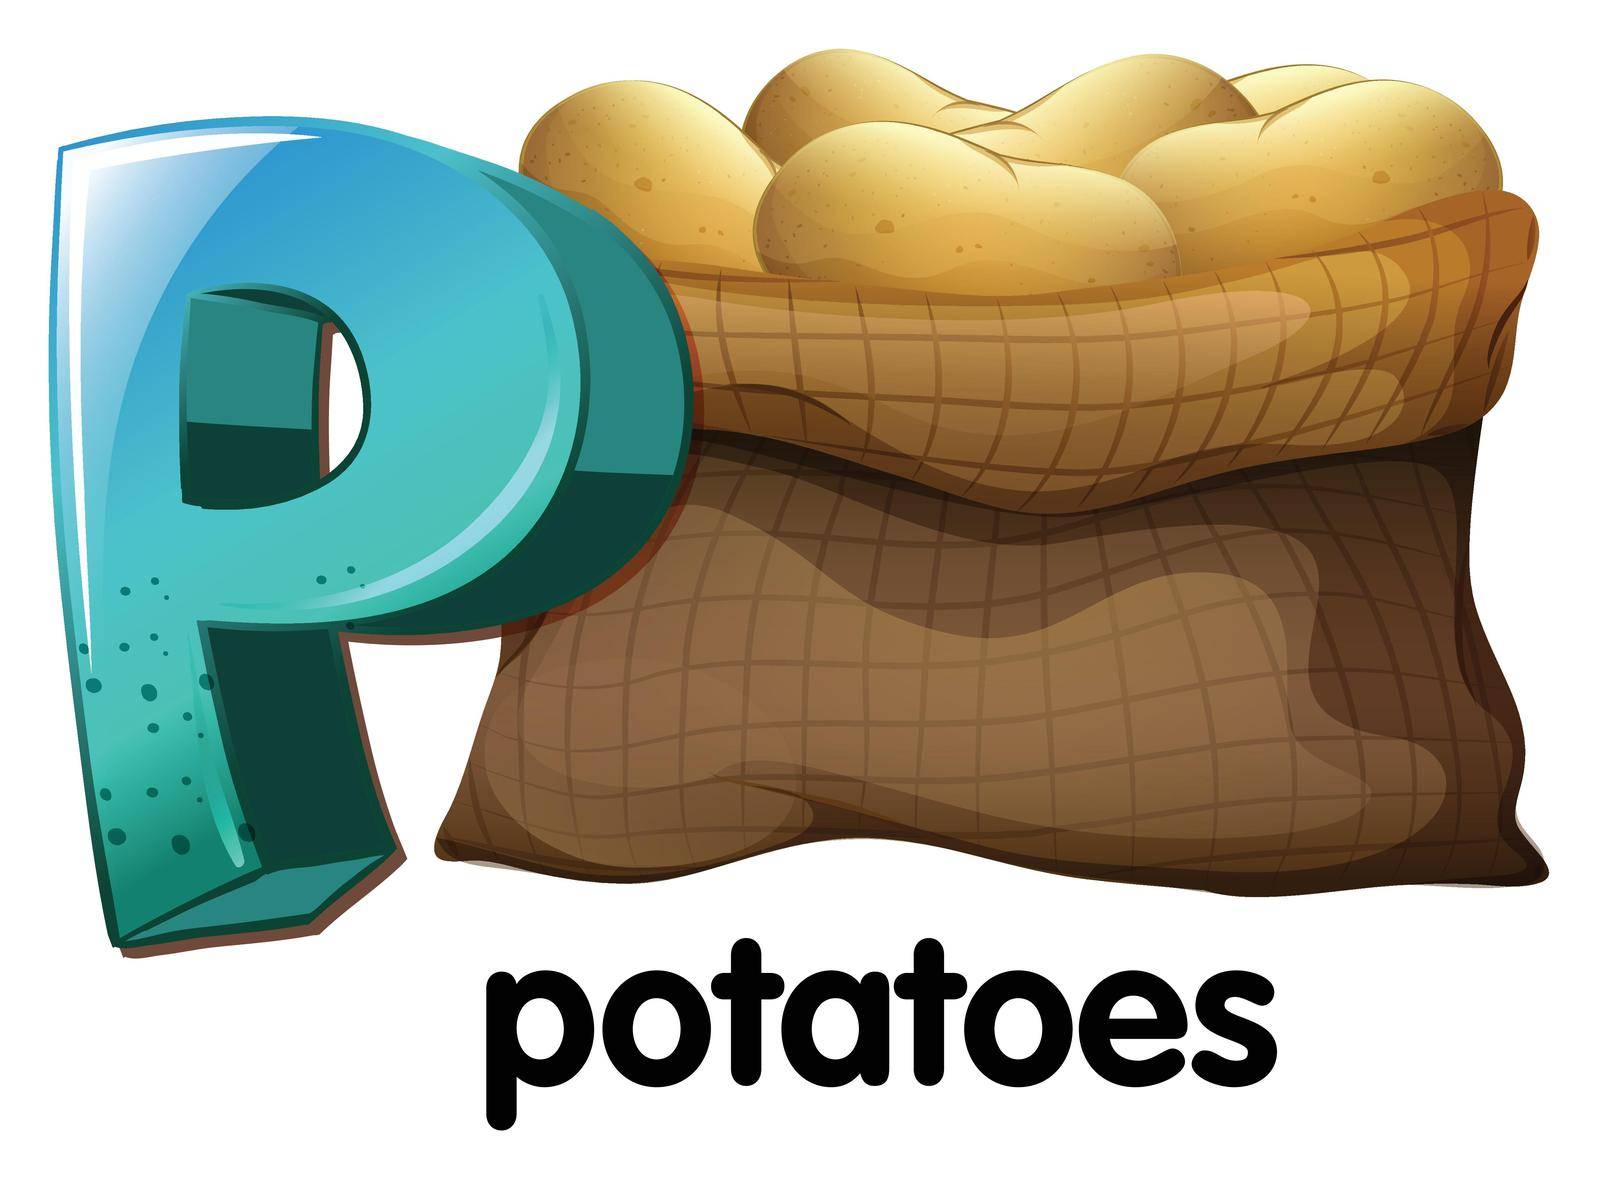 A letter P for potatoes by iimages